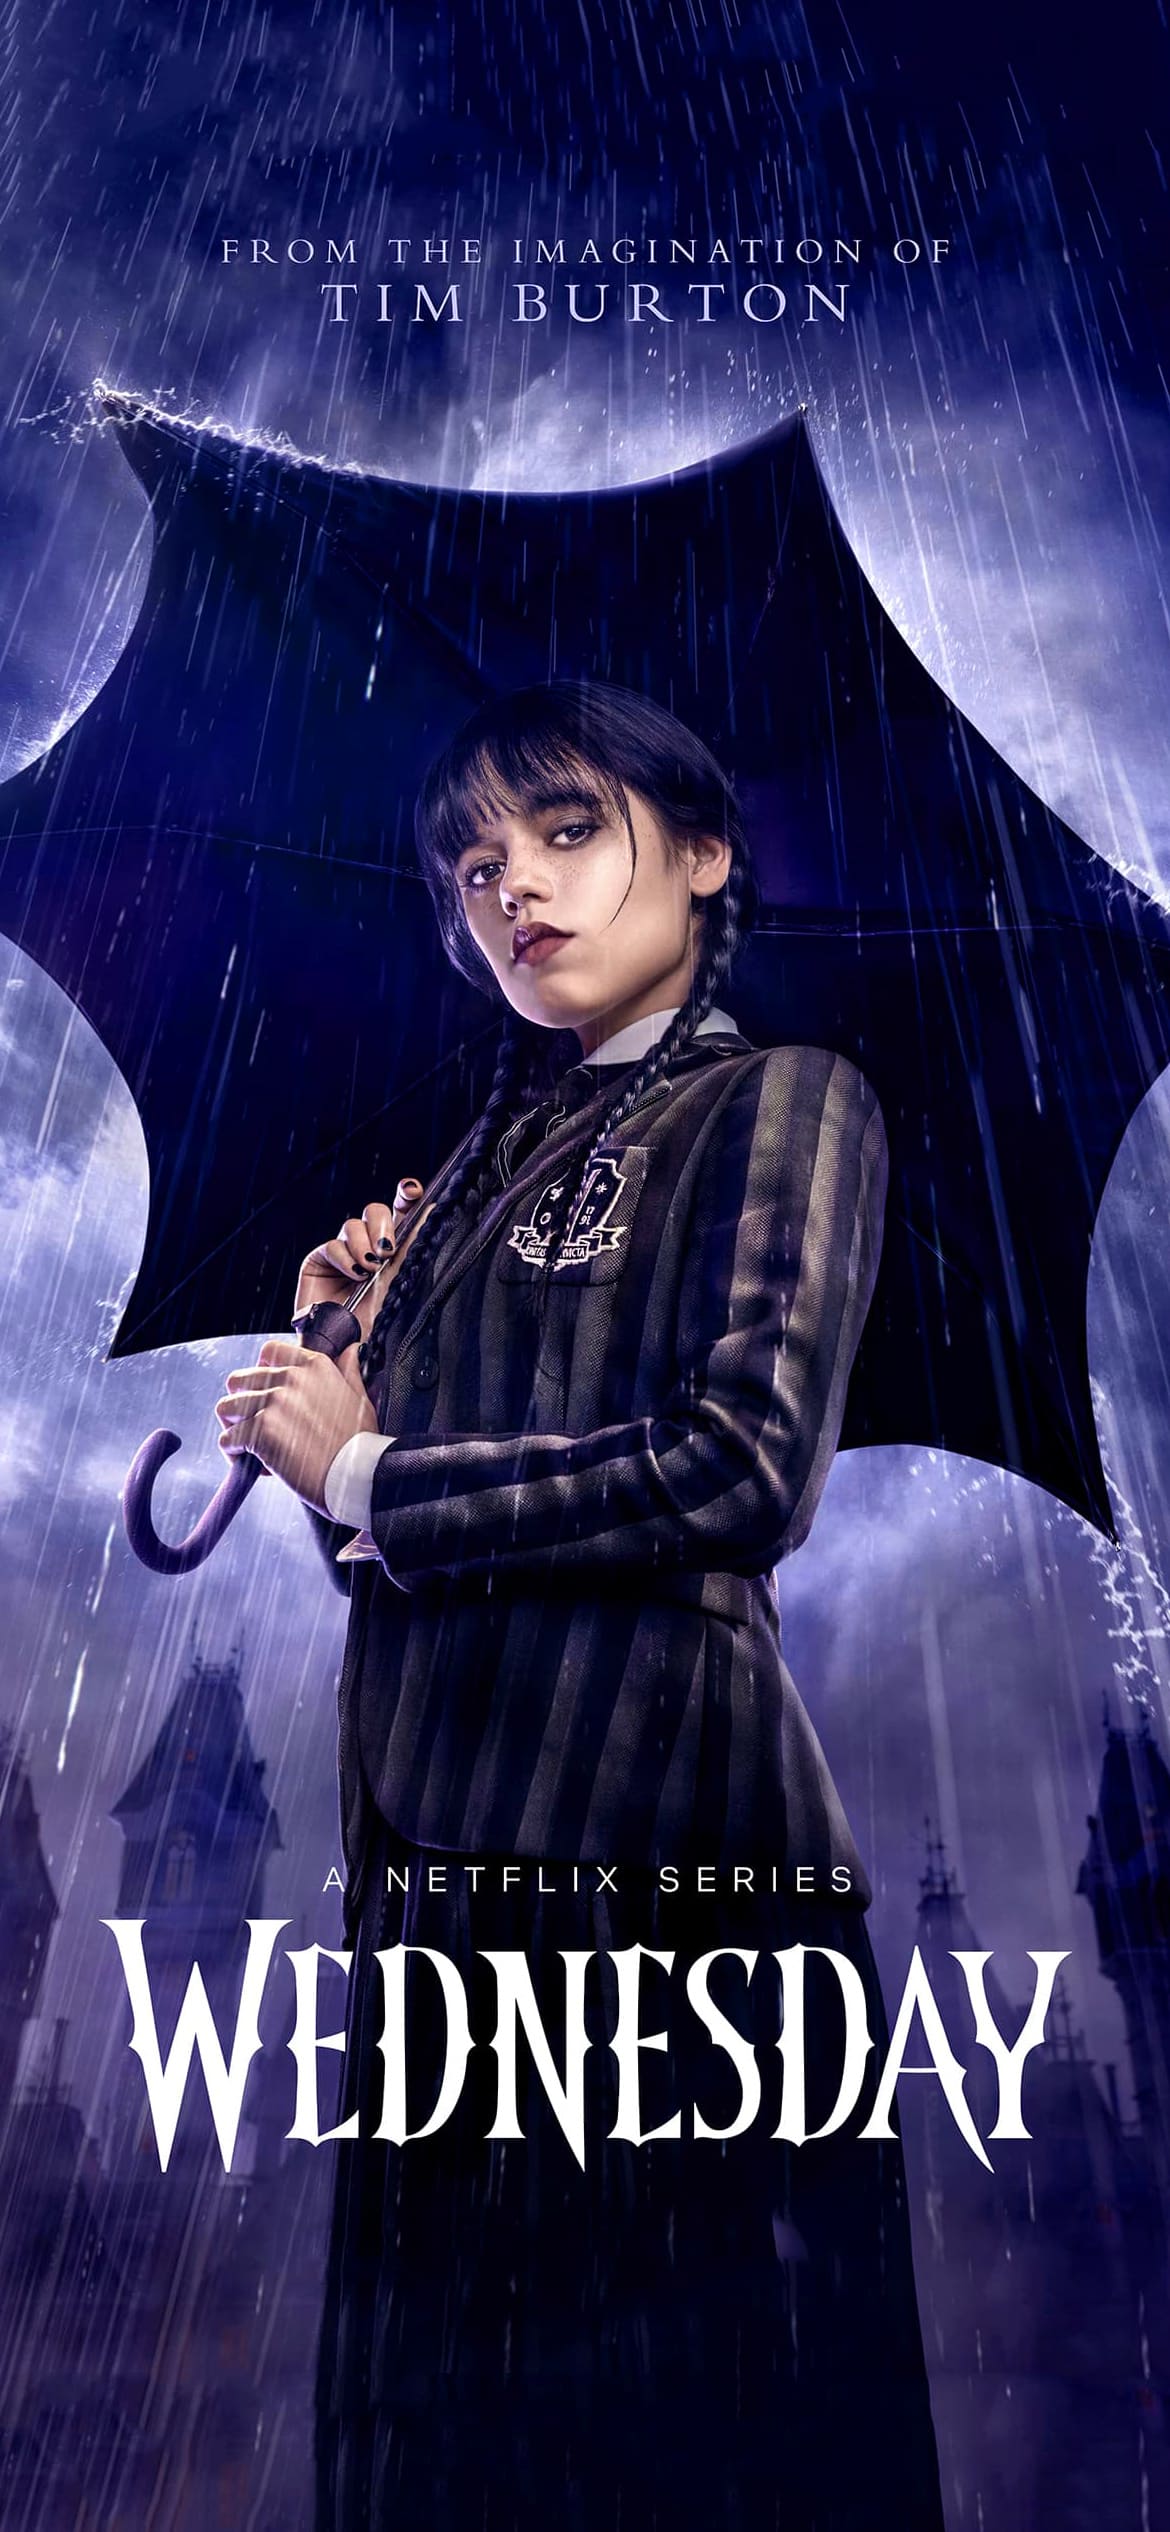 Wednesday promotional poster featuring Wednesday Addams holding an umbrella in the rain - Wednesday